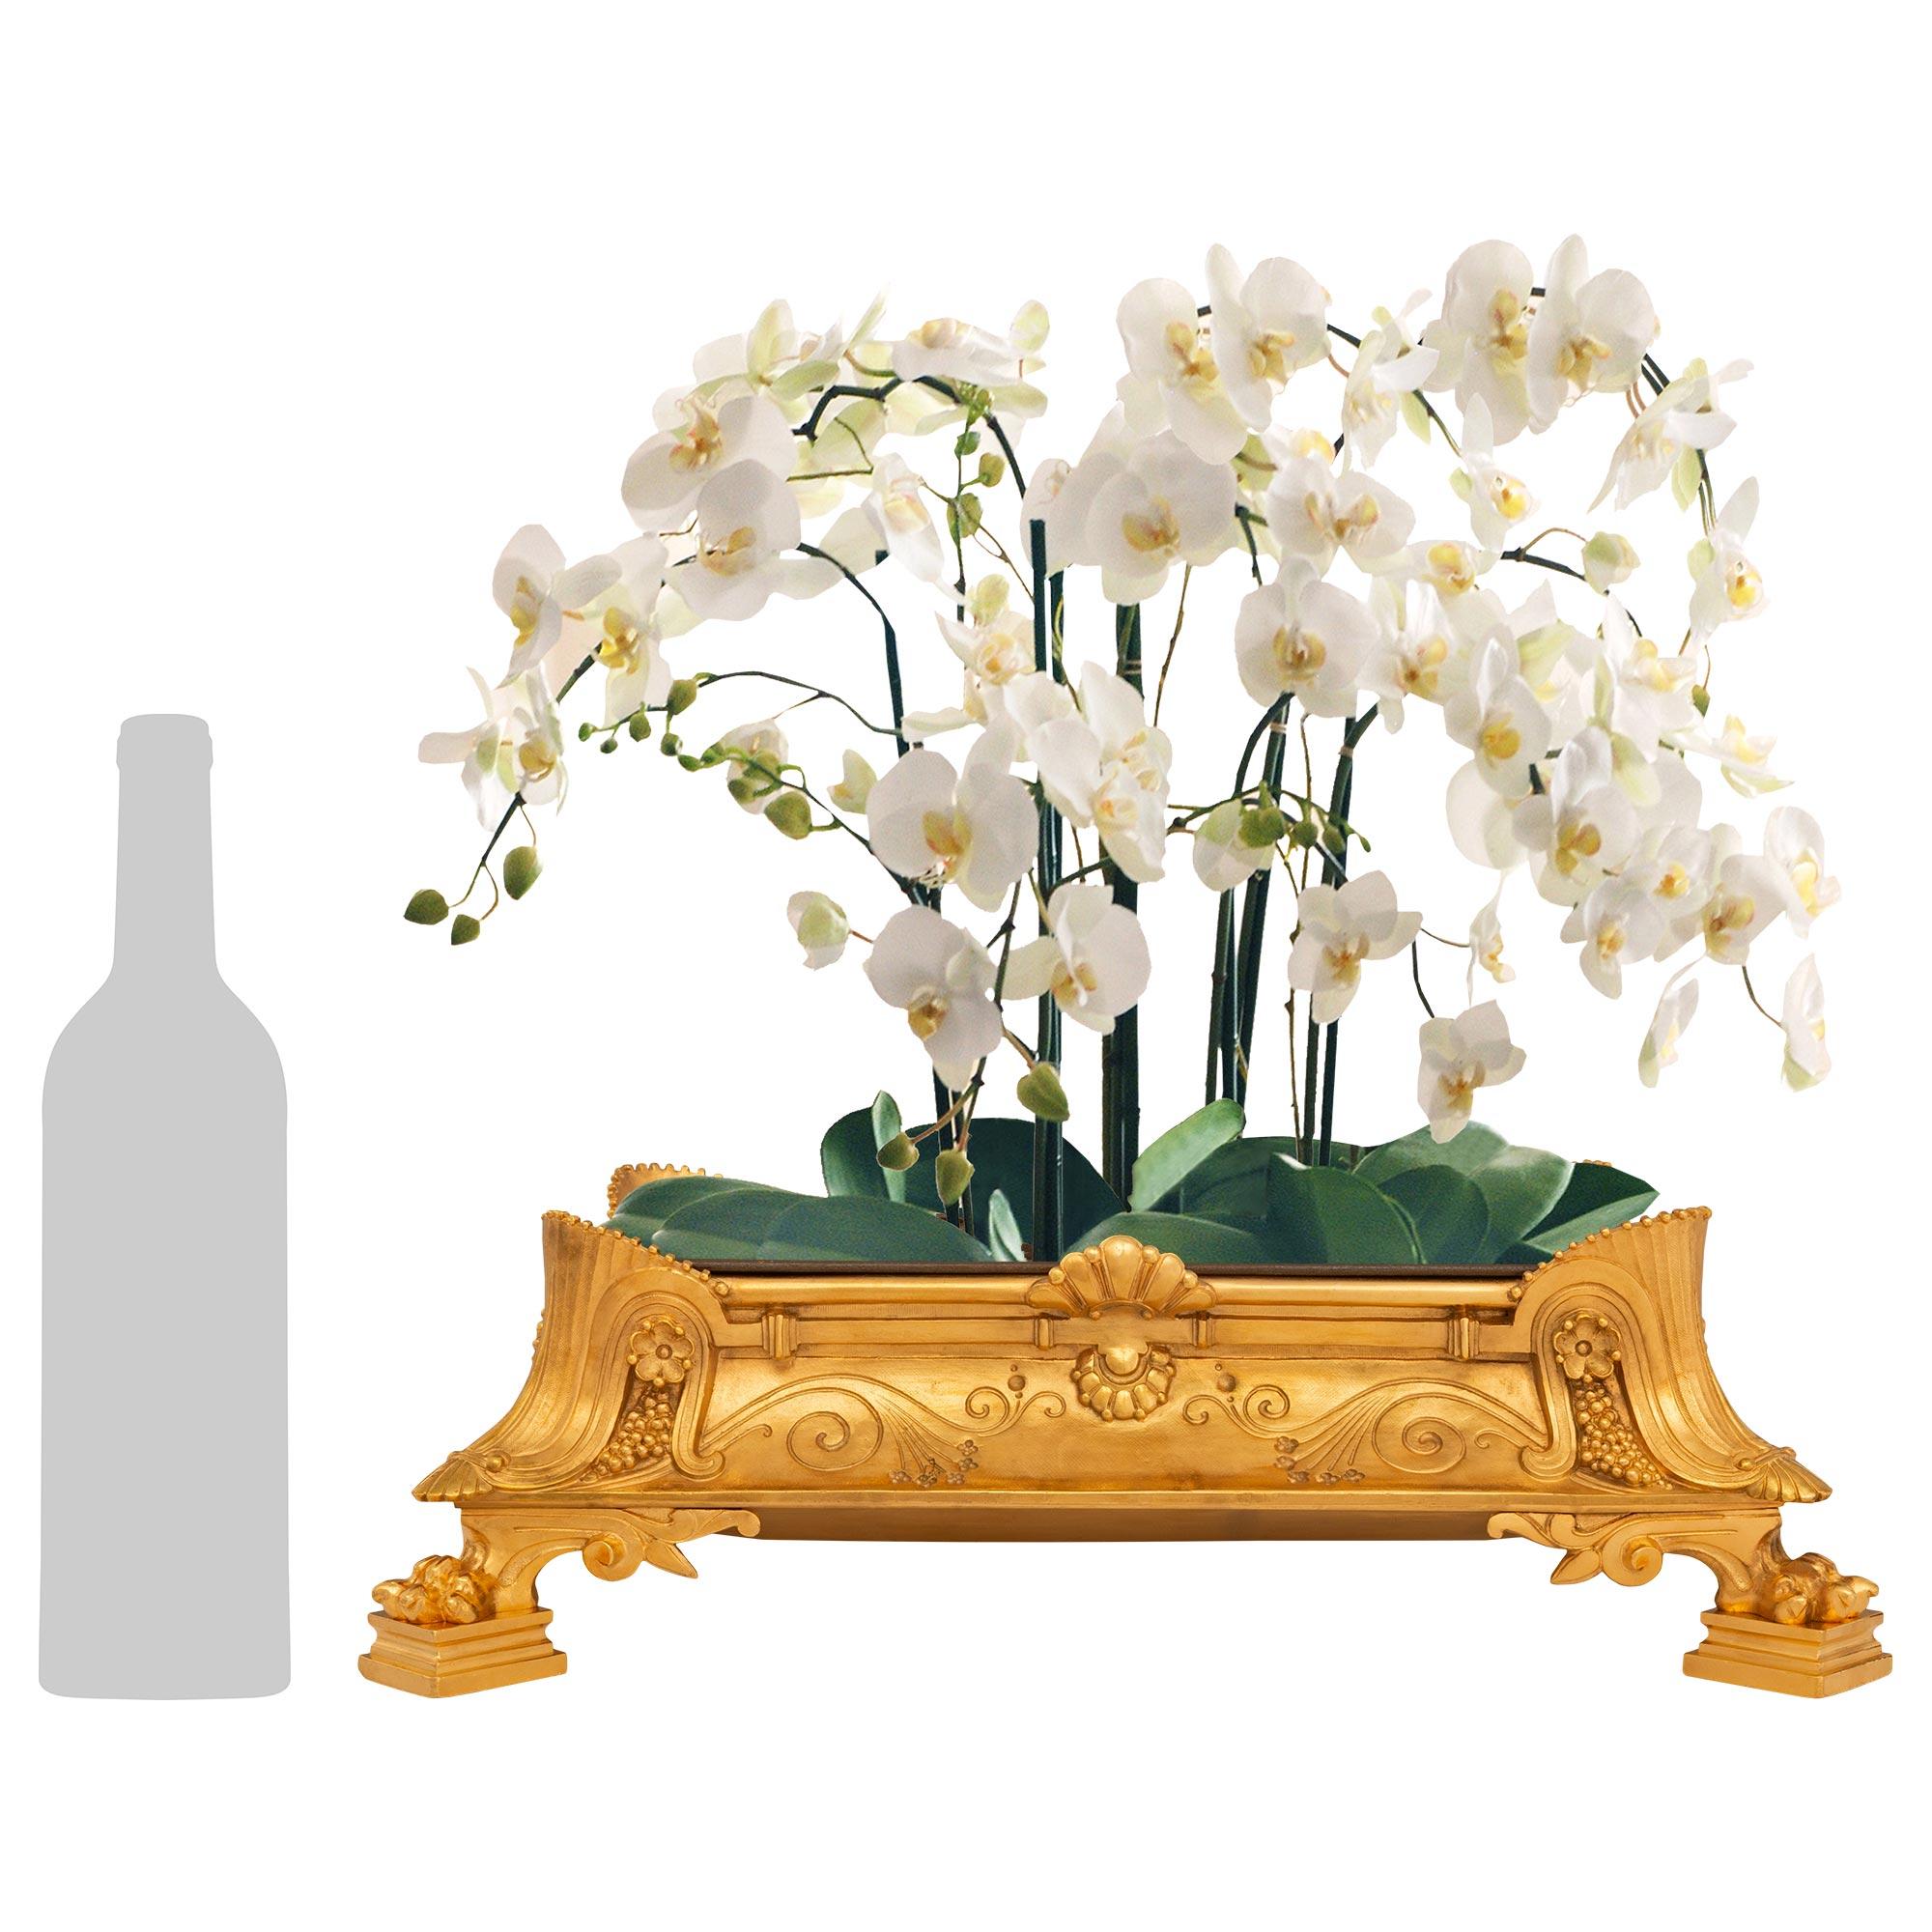 A striking and most unique set of four French 19th century Renaissance st. Ormolu centerpiece/planters. Each centerpiece is raised by elegant mottled supports below handsome paw feet and remarkable scrolled foliate fluted elements at each corner